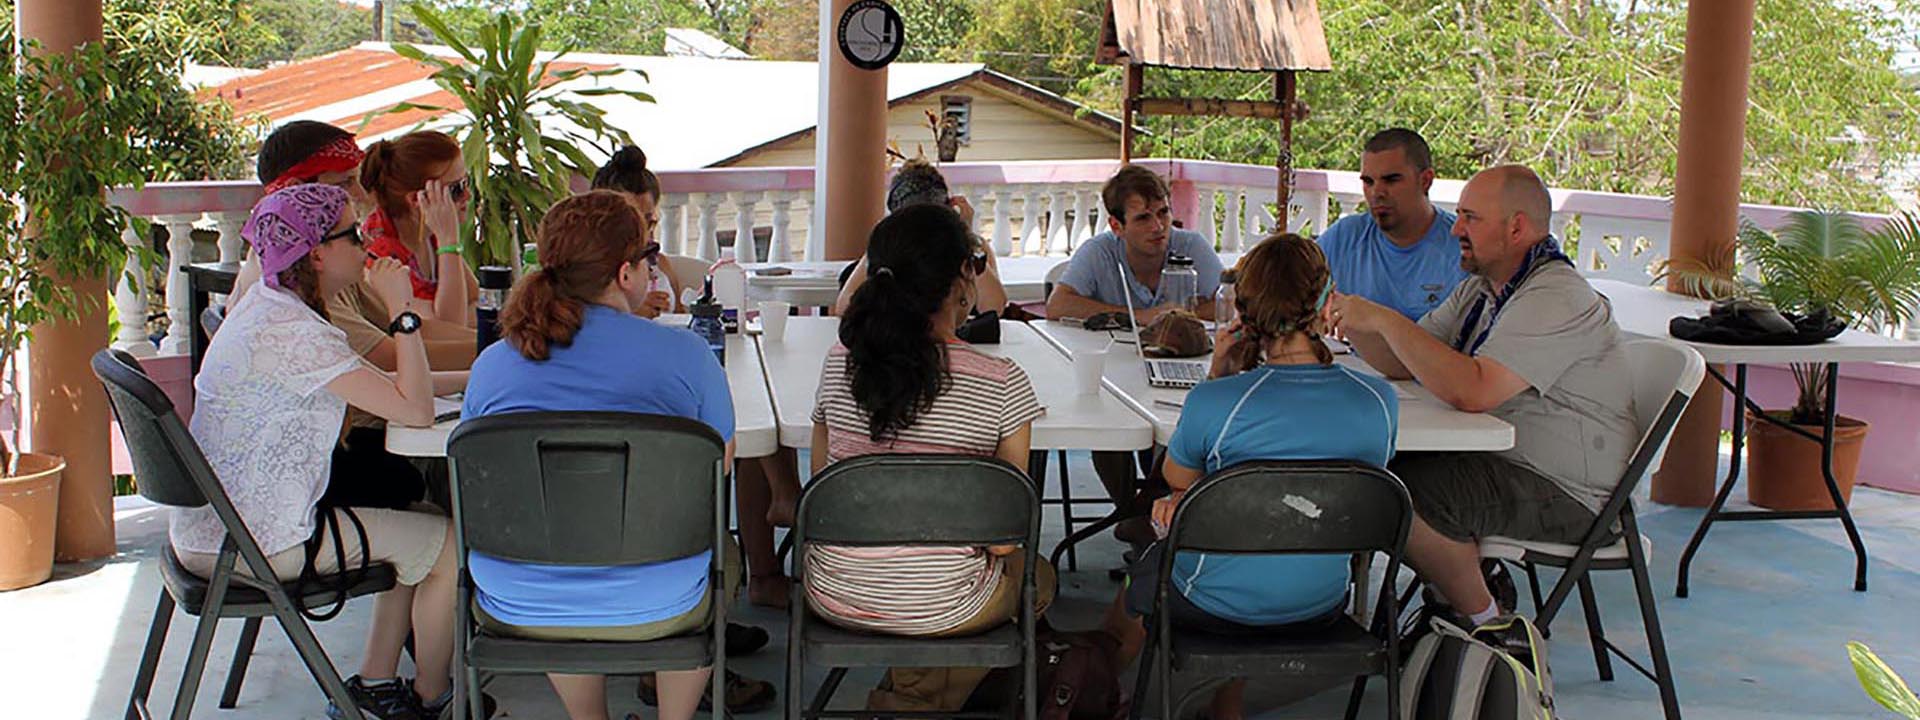 Douglas Hume and Students of the 2013 Ethnographic Field School, Orange Walk Town, Belize